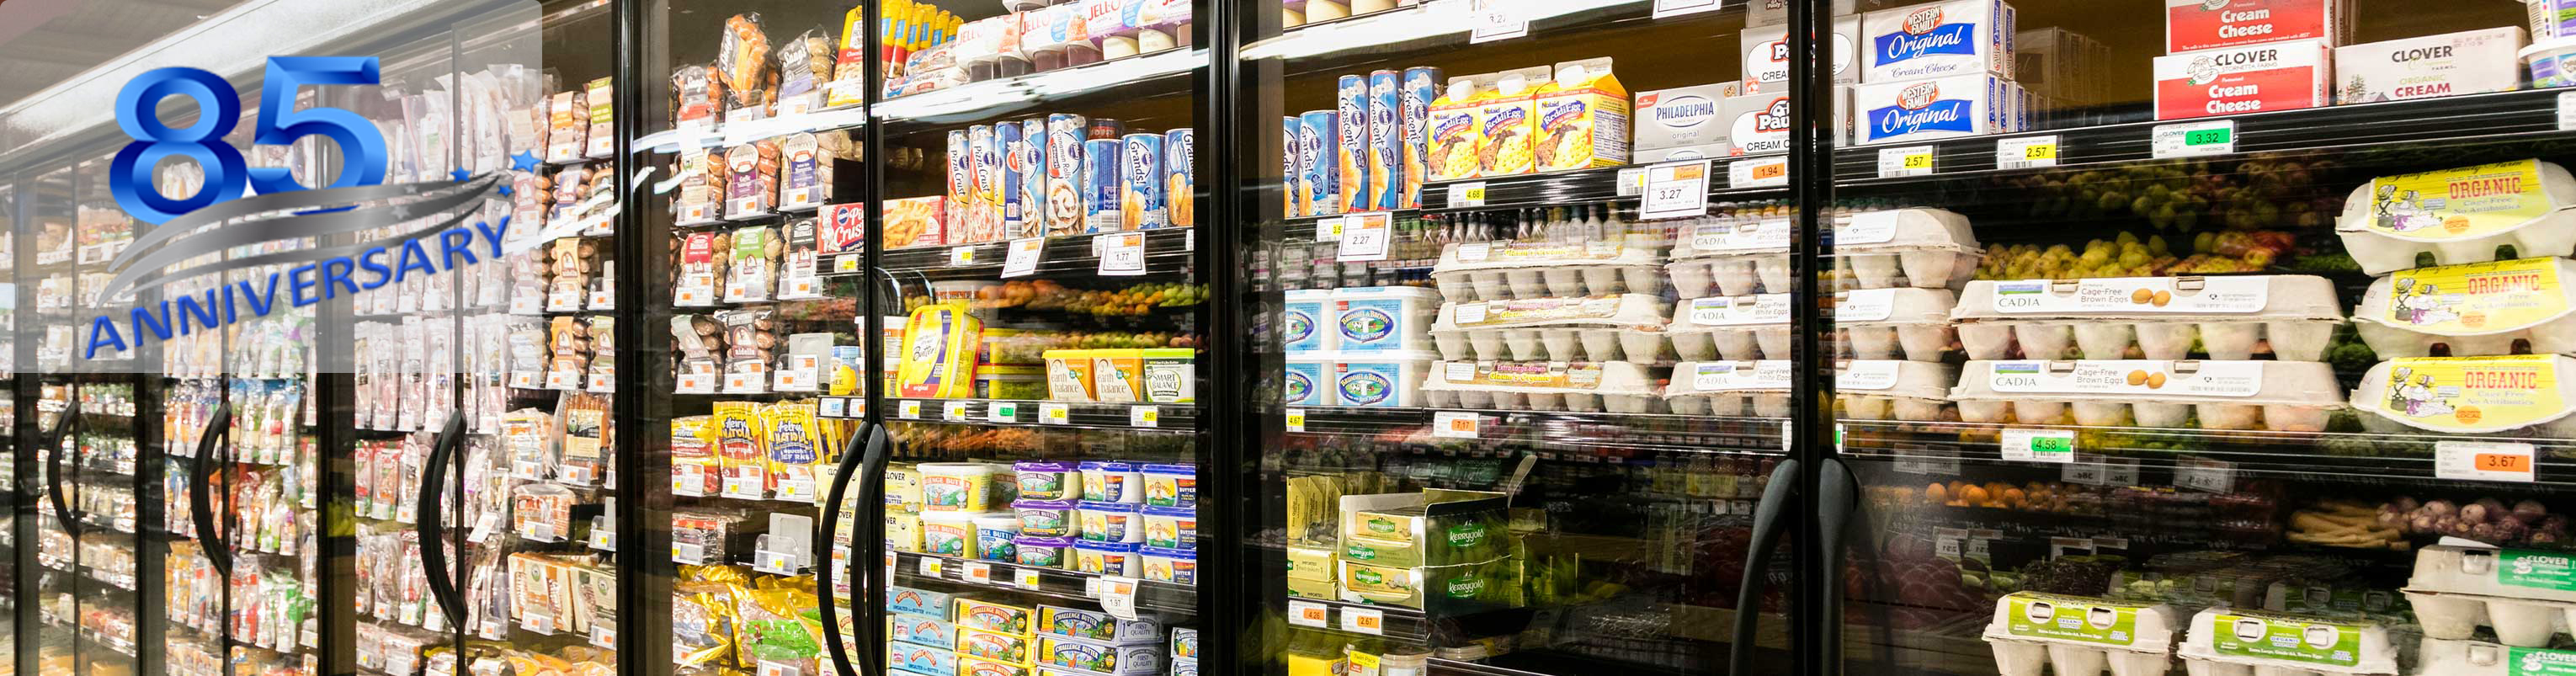 Grocery store refrigerators- Commercial refrigeration installation and repair is a specialty of Pierce in West Bridgewater, MA.